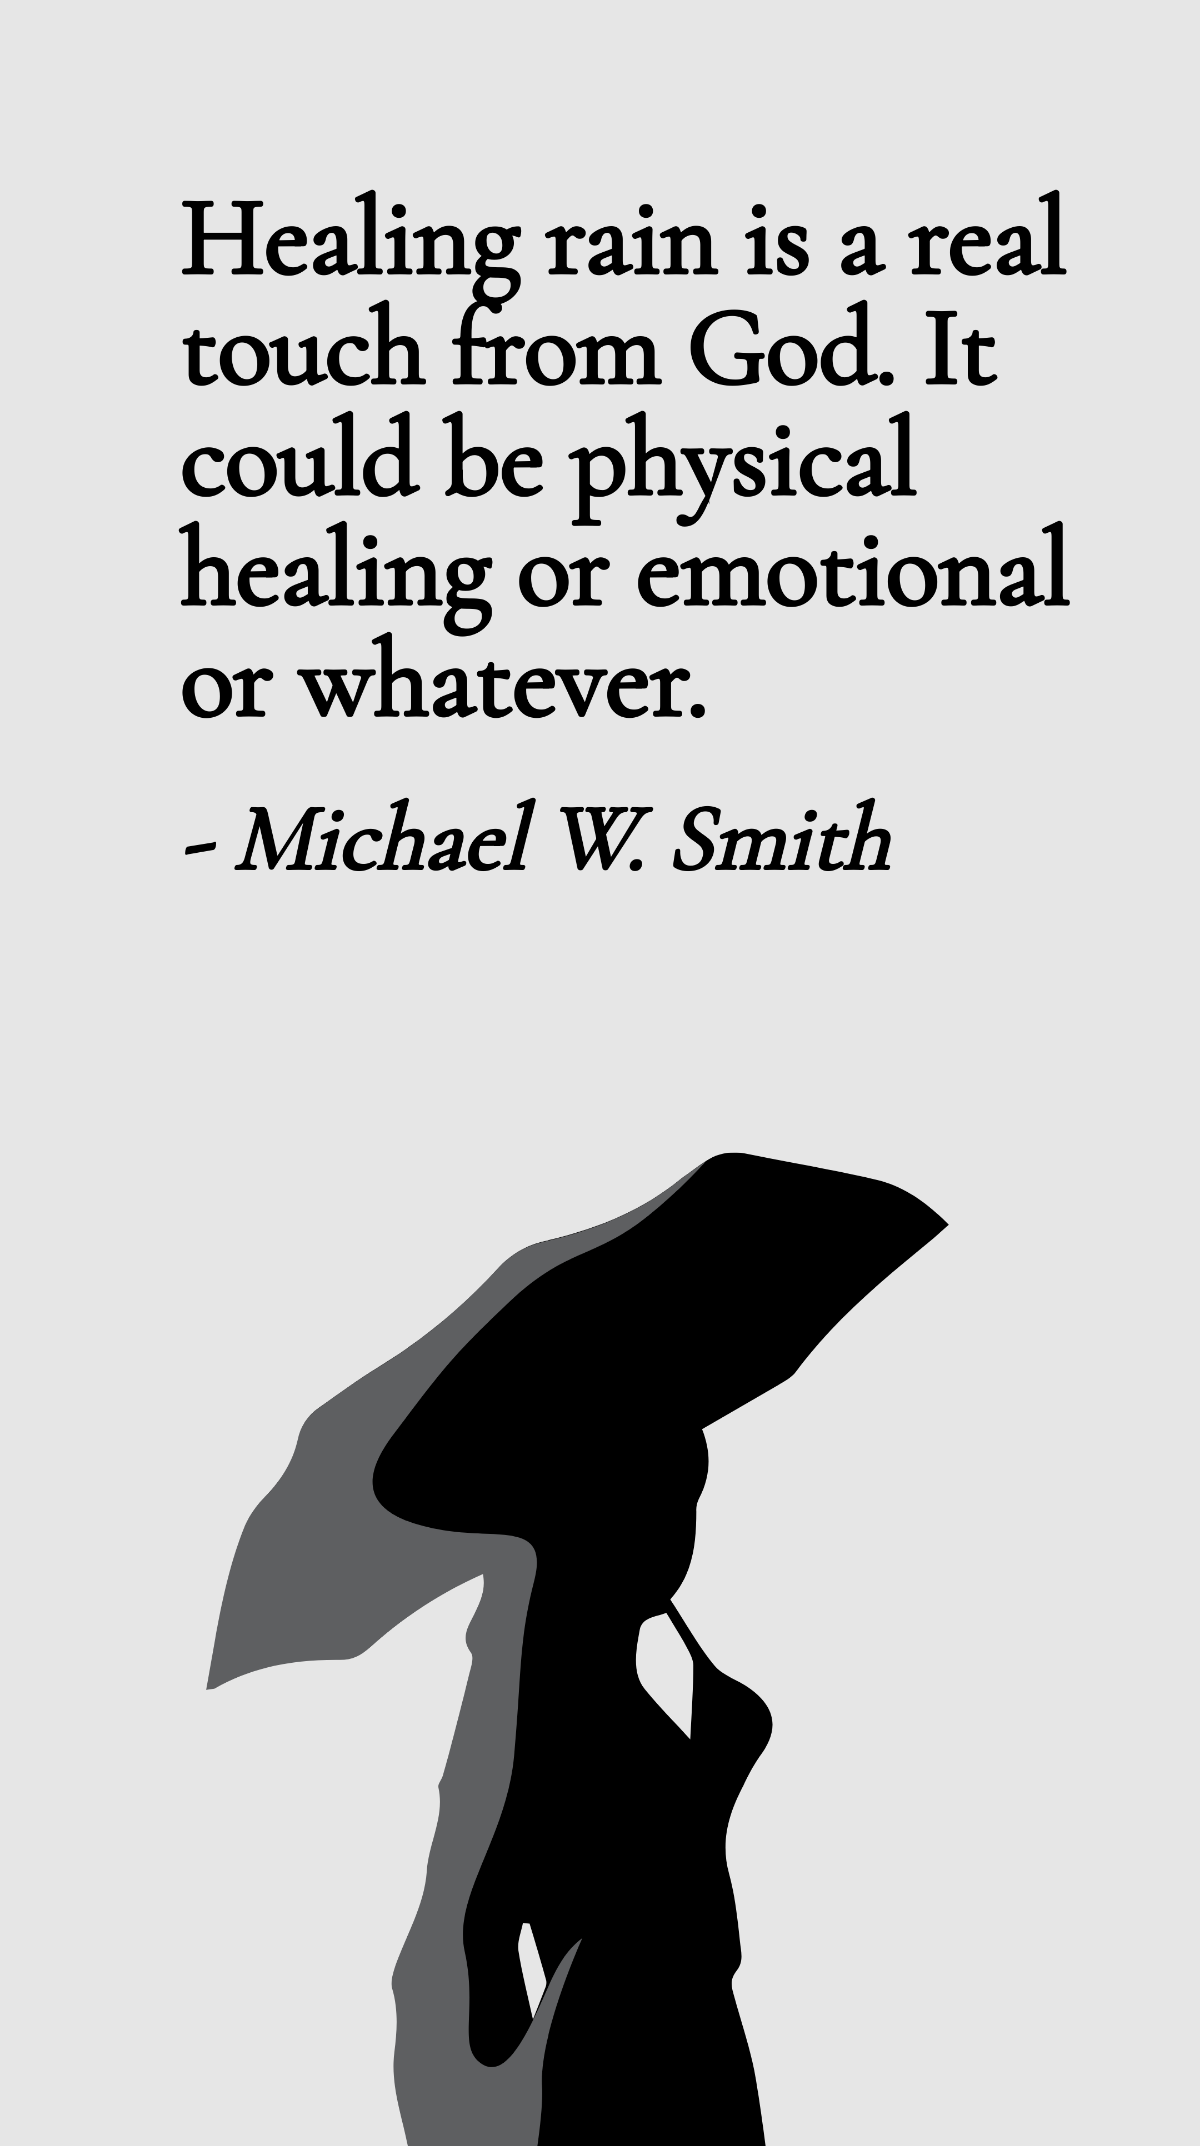 Michael W. Smith - Healing rain is a real touch from God. It could be physical healing or emotional or whatever. Template